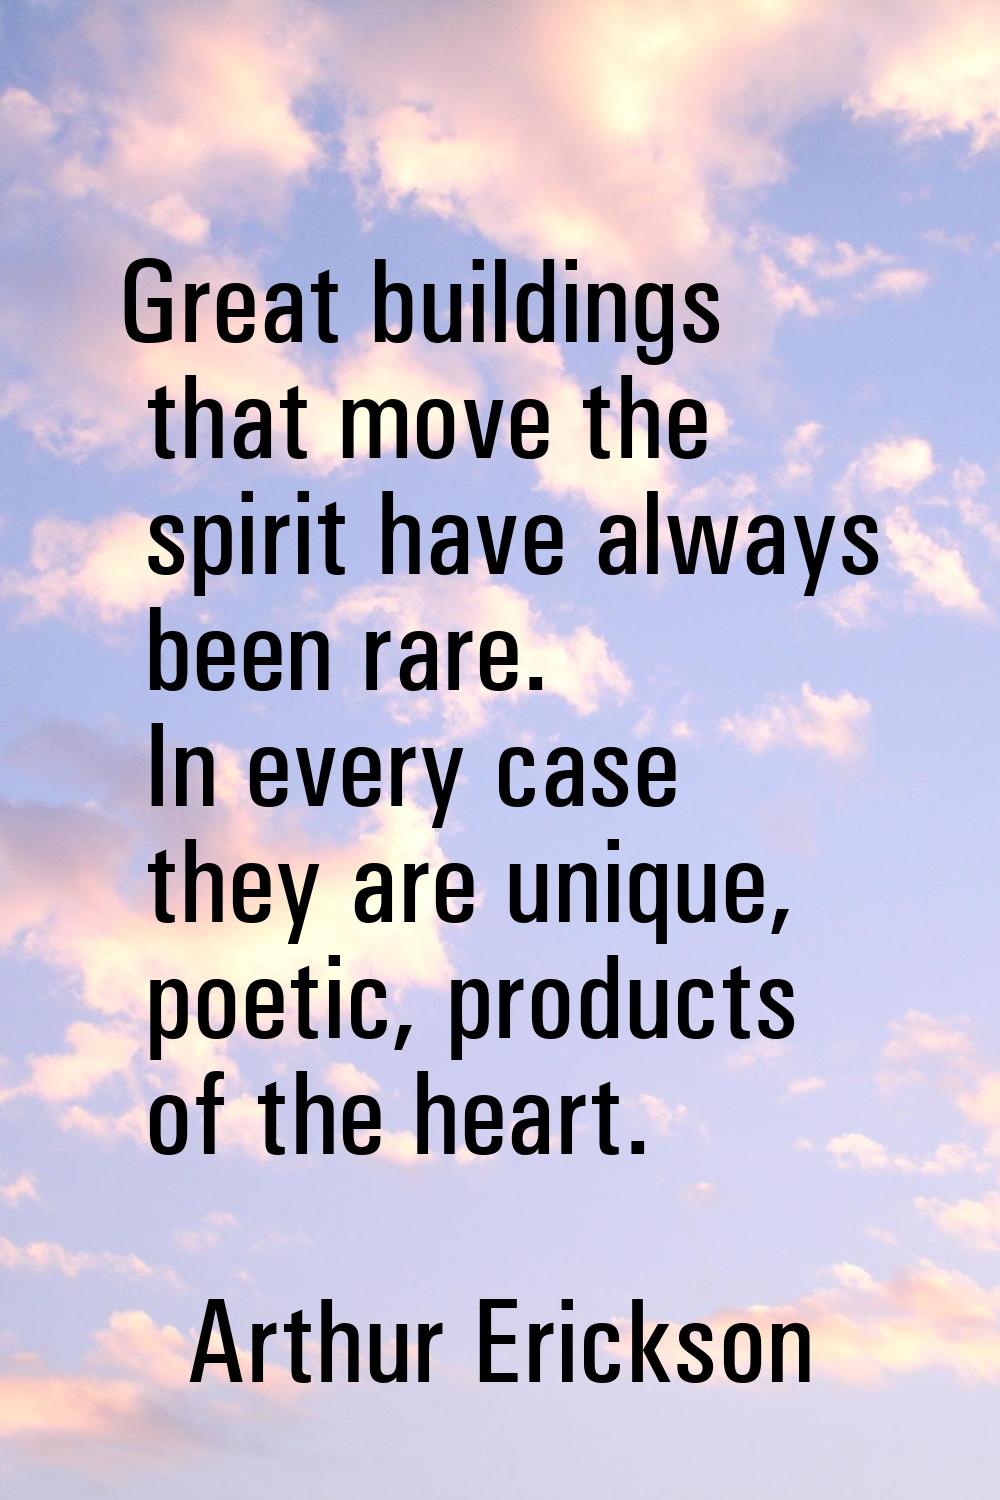 Great buildings that move the spirit have always been rare. In every case they are unique, poetic, 